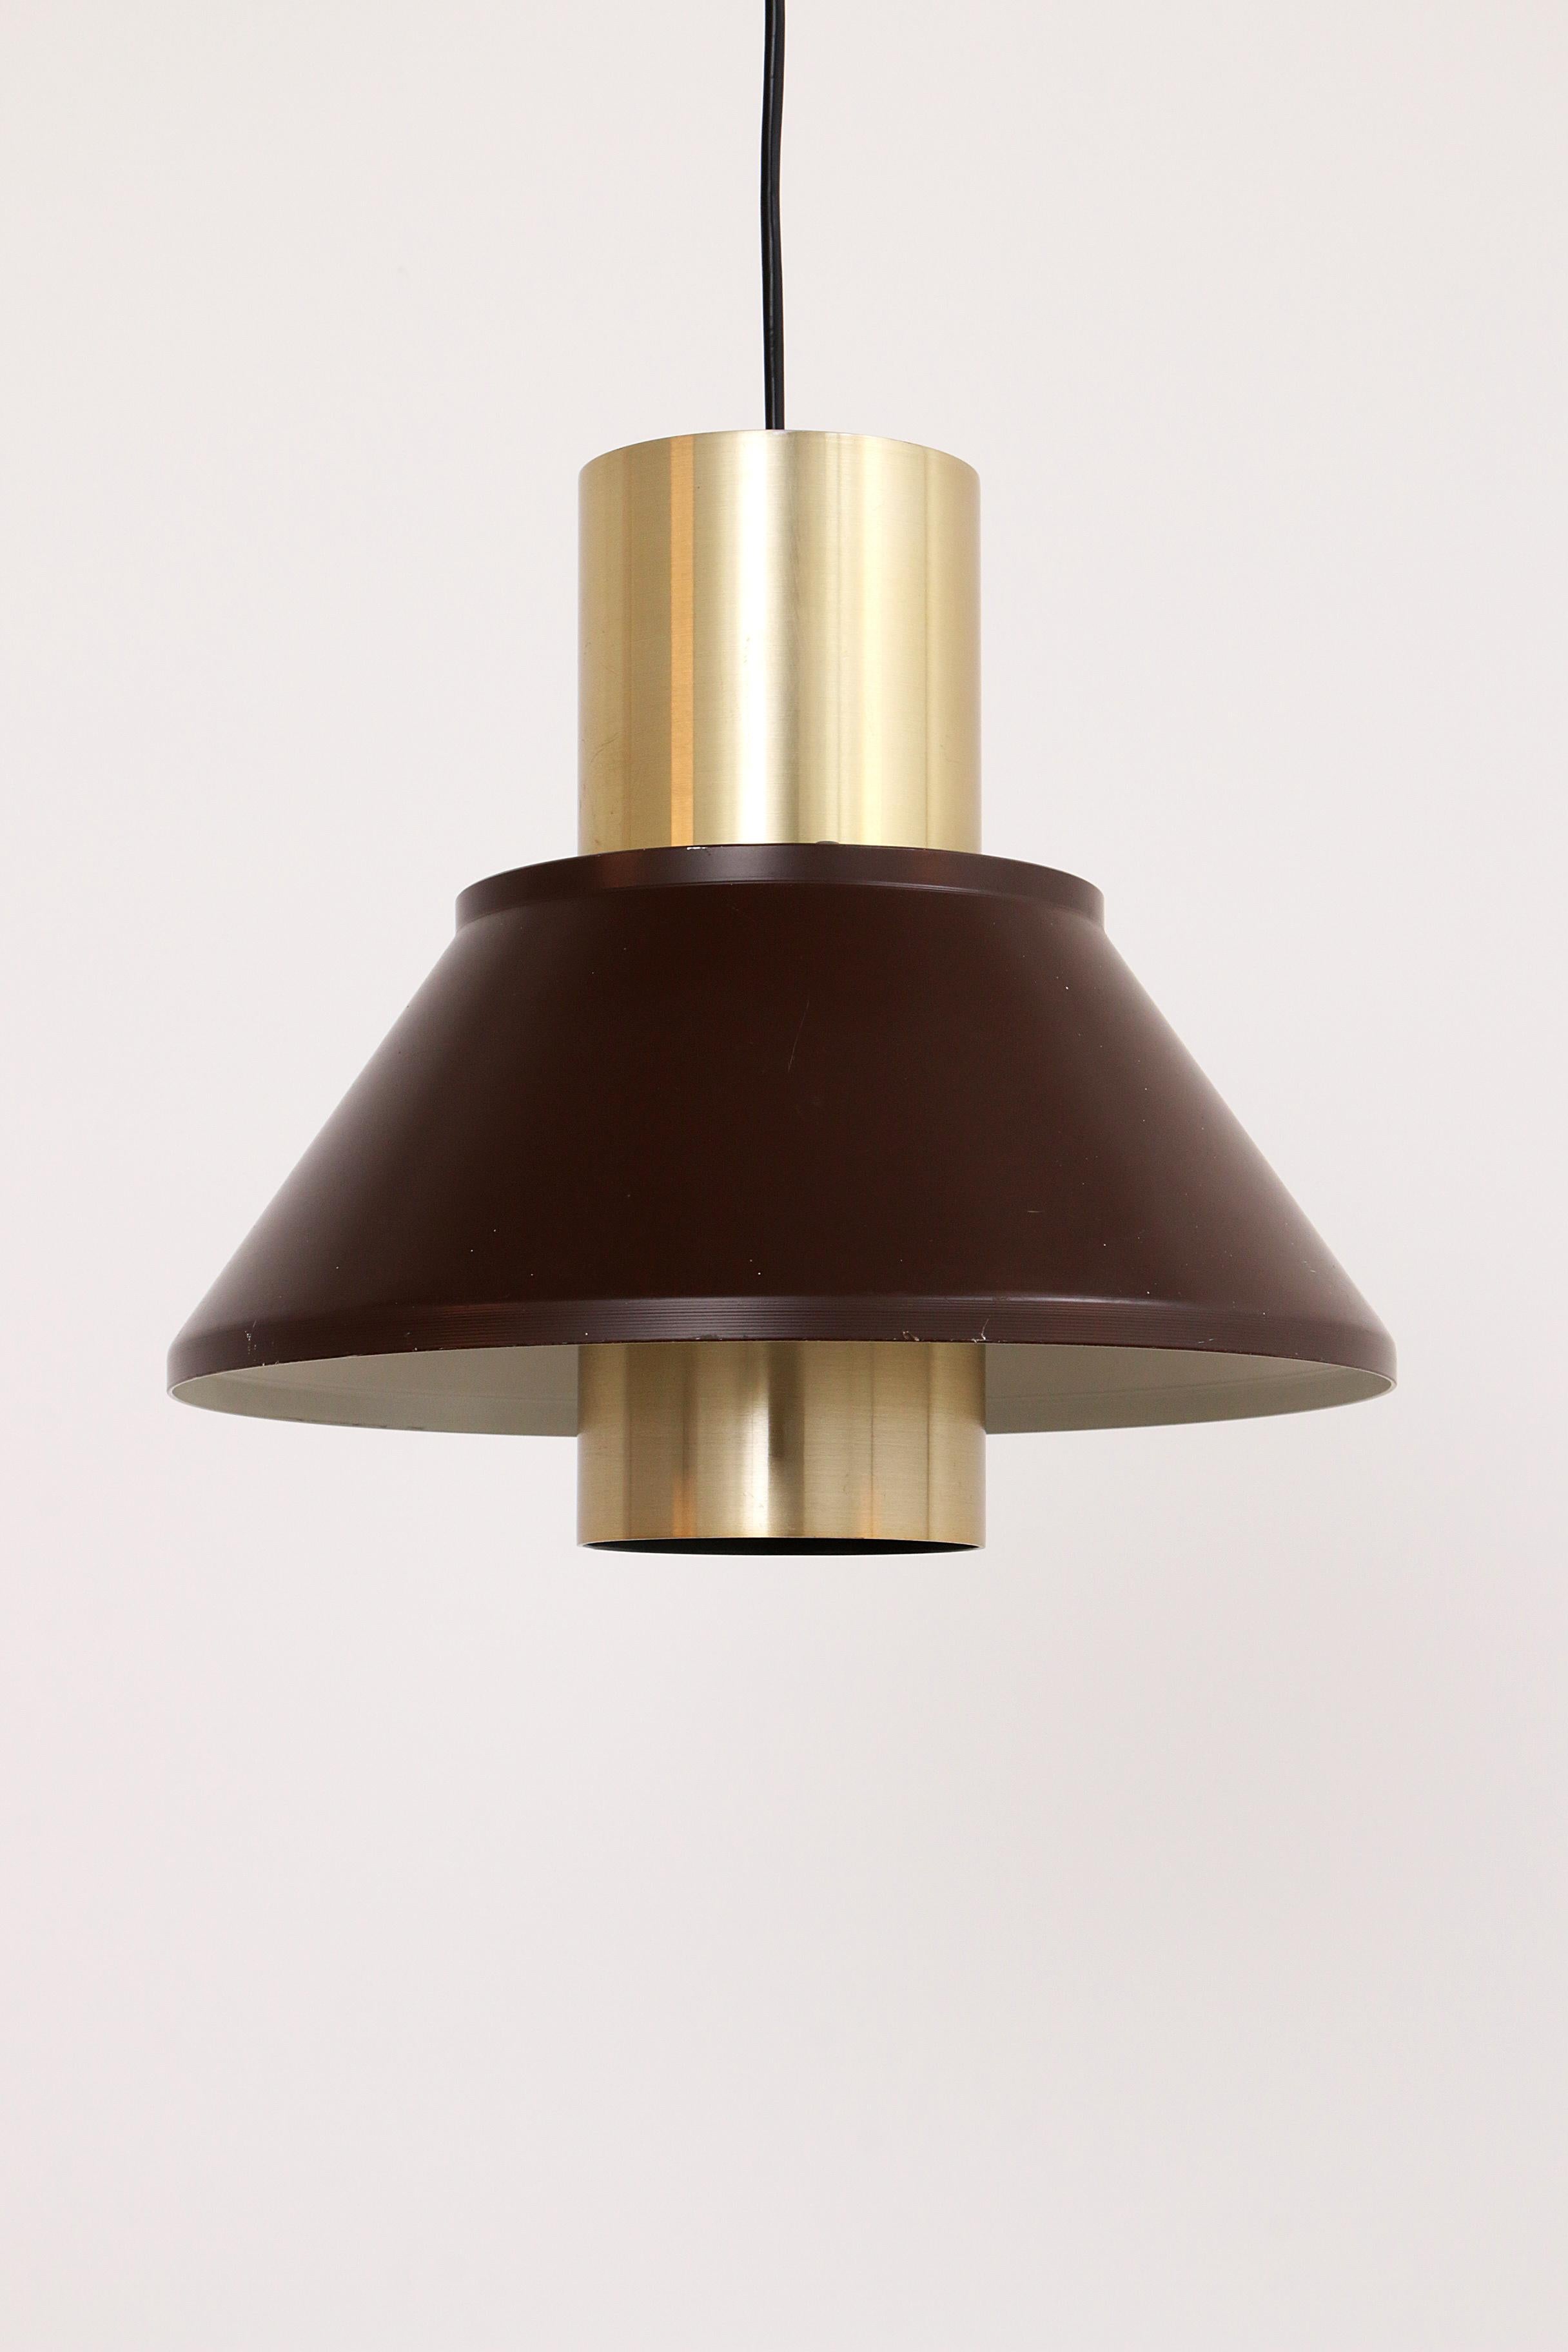 Discover the timeless beauty of the Vintage Jo Hammerborg Pendant Lamp, an authentic piece of design history manufactured by Fog & Morup in the 1970s. This pendant lamp is not only a lighting object, but also a work of art that embodies the essence